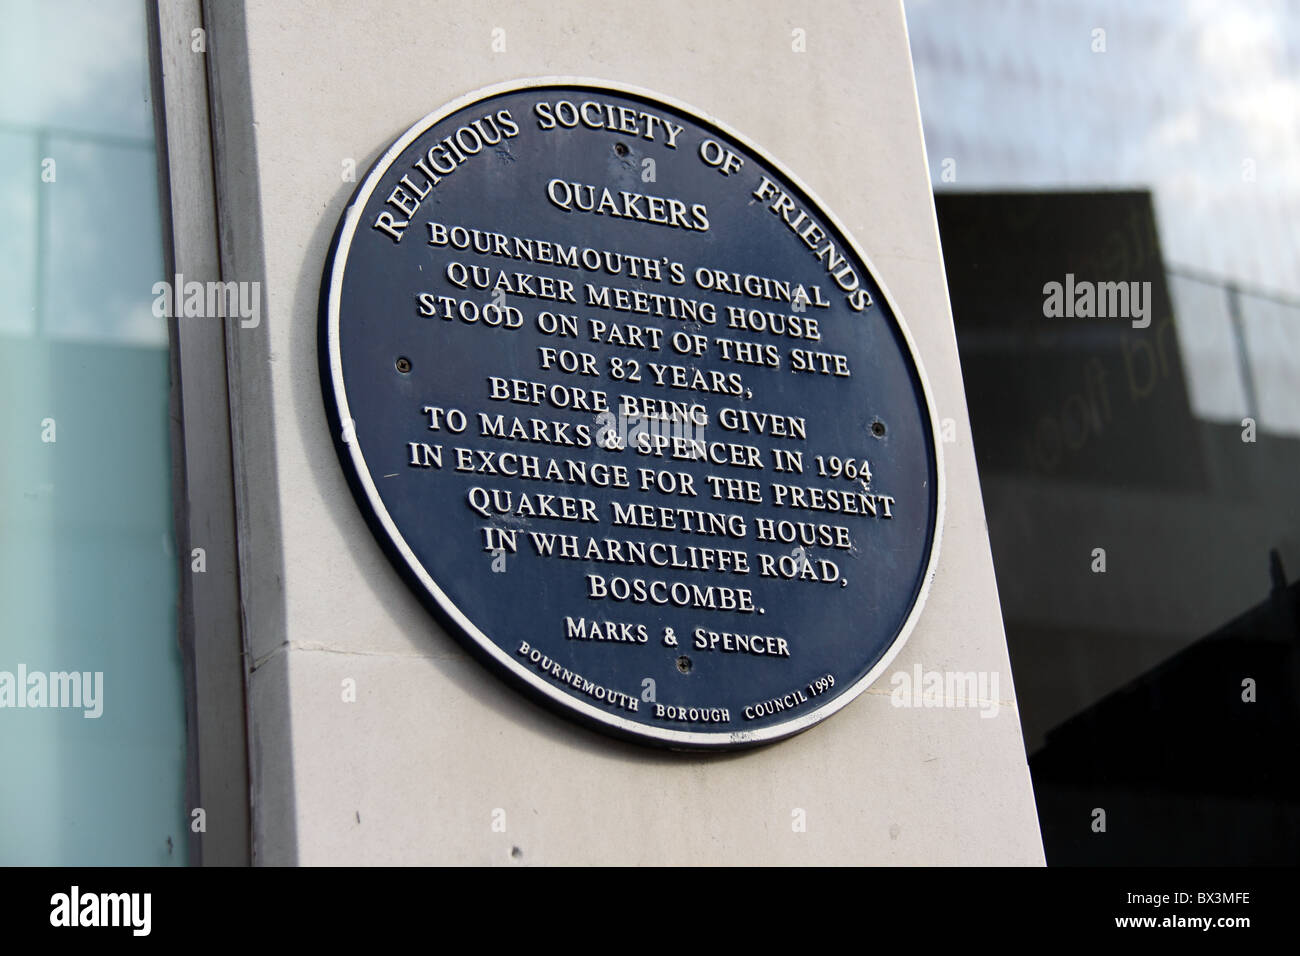 Plaque outside the Marks and Spencer shop in Commercial Road, Bournemouth marking the site of the original Quaker Meeting House Stock Photo